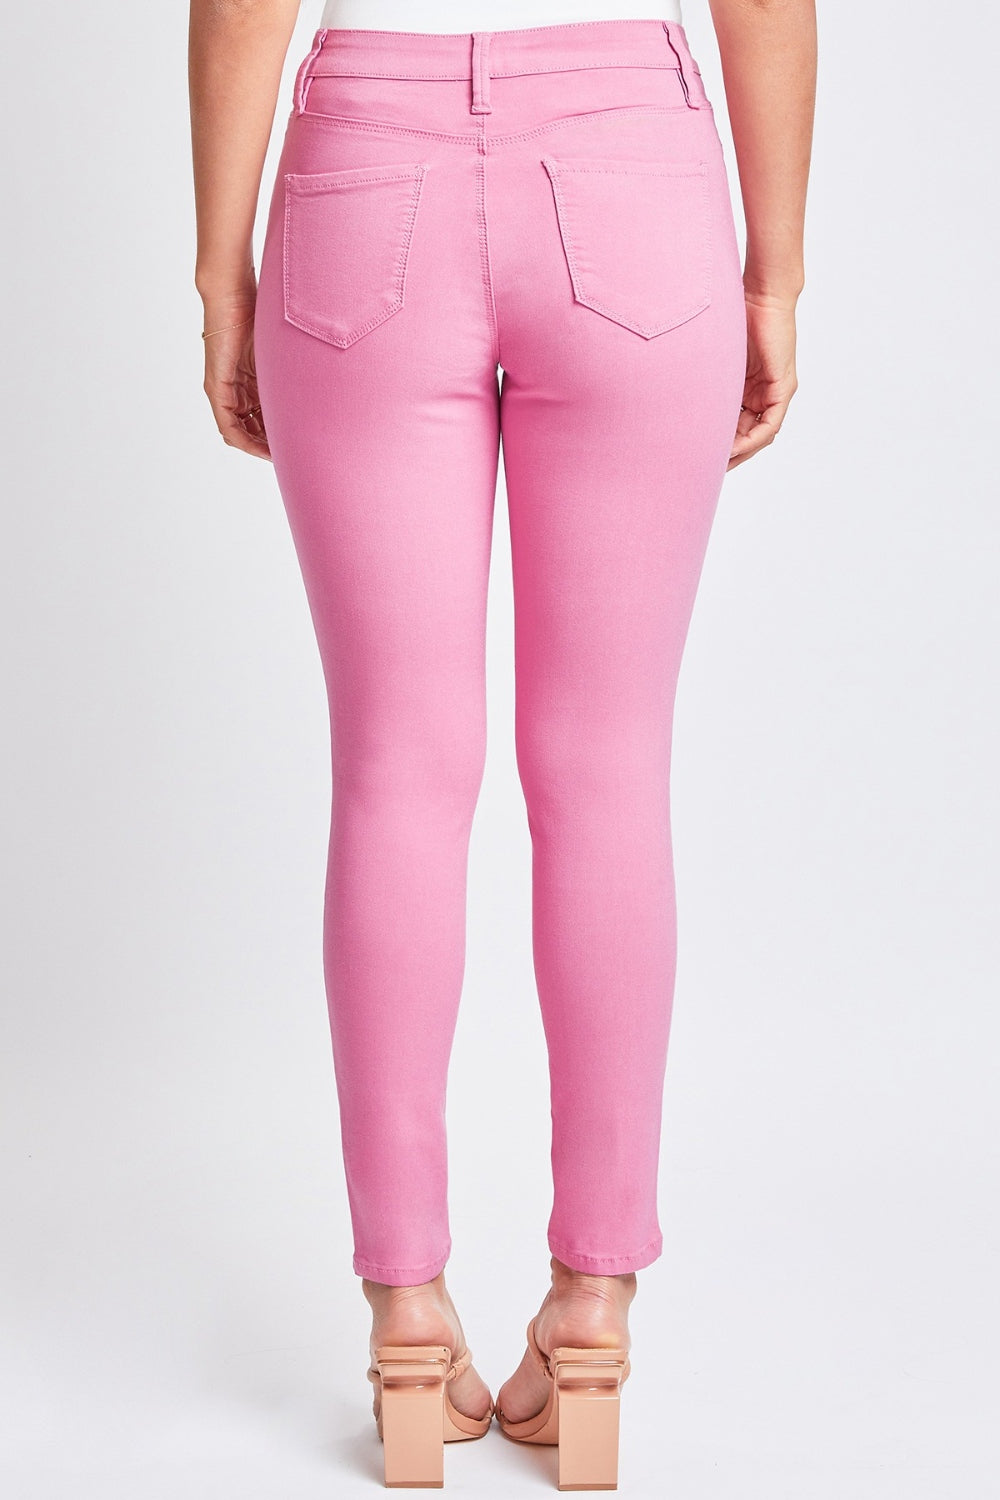 Blisse Hyperstretch Mid-Rise Skinny Pants in Flami-Flamingo